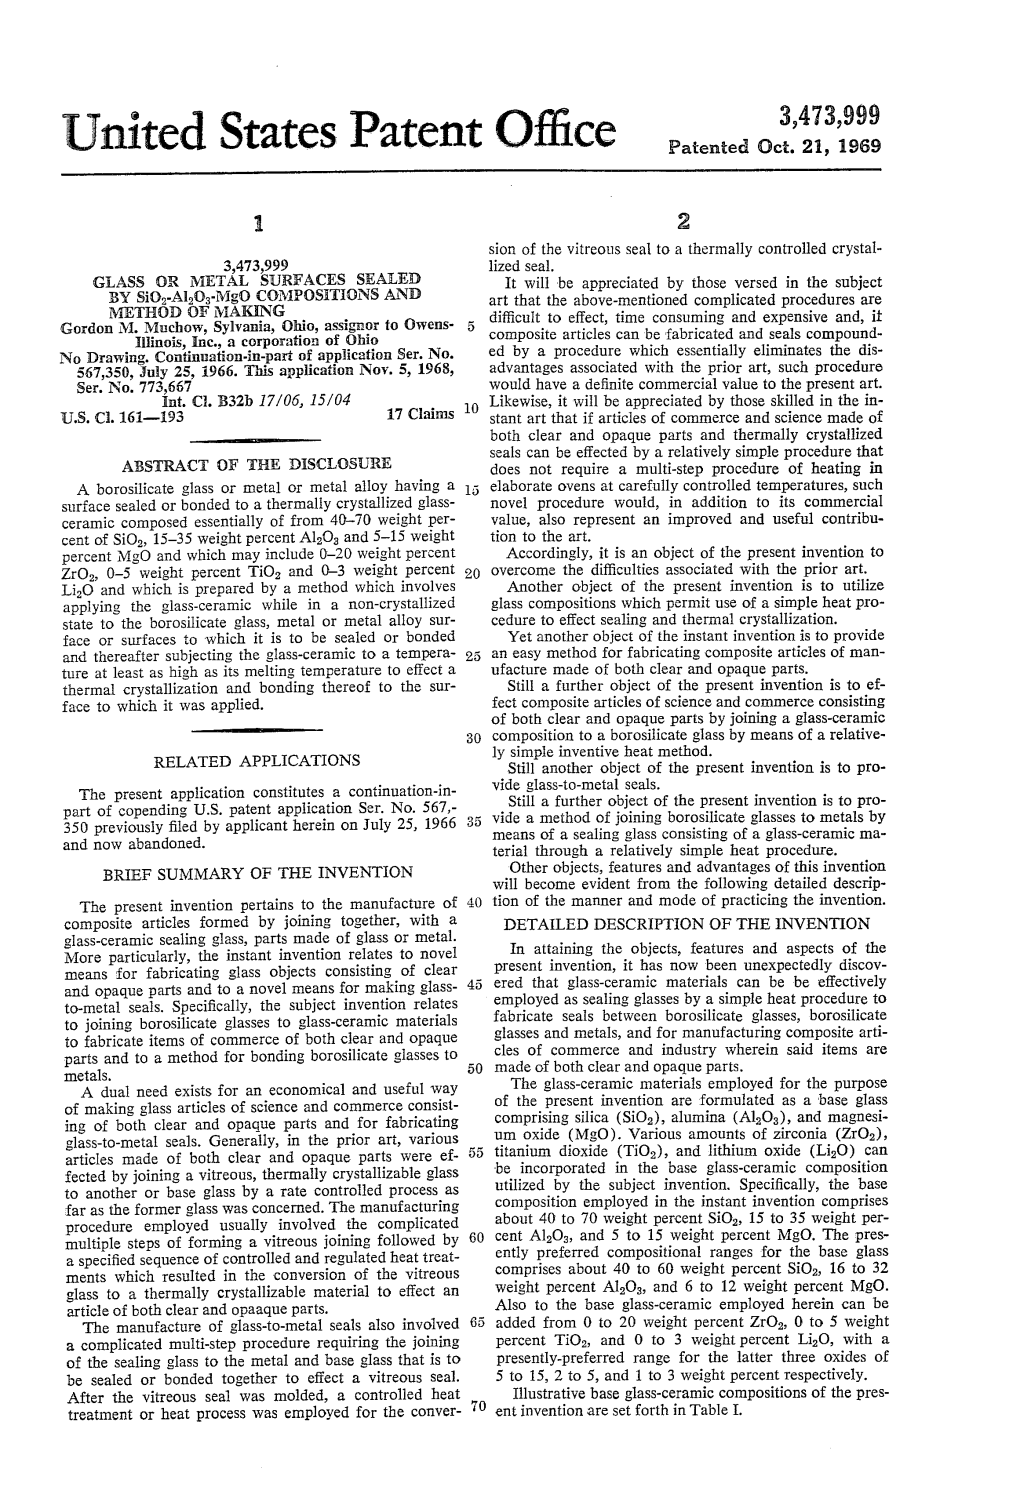 United States Patent O" Ice Patented Oct